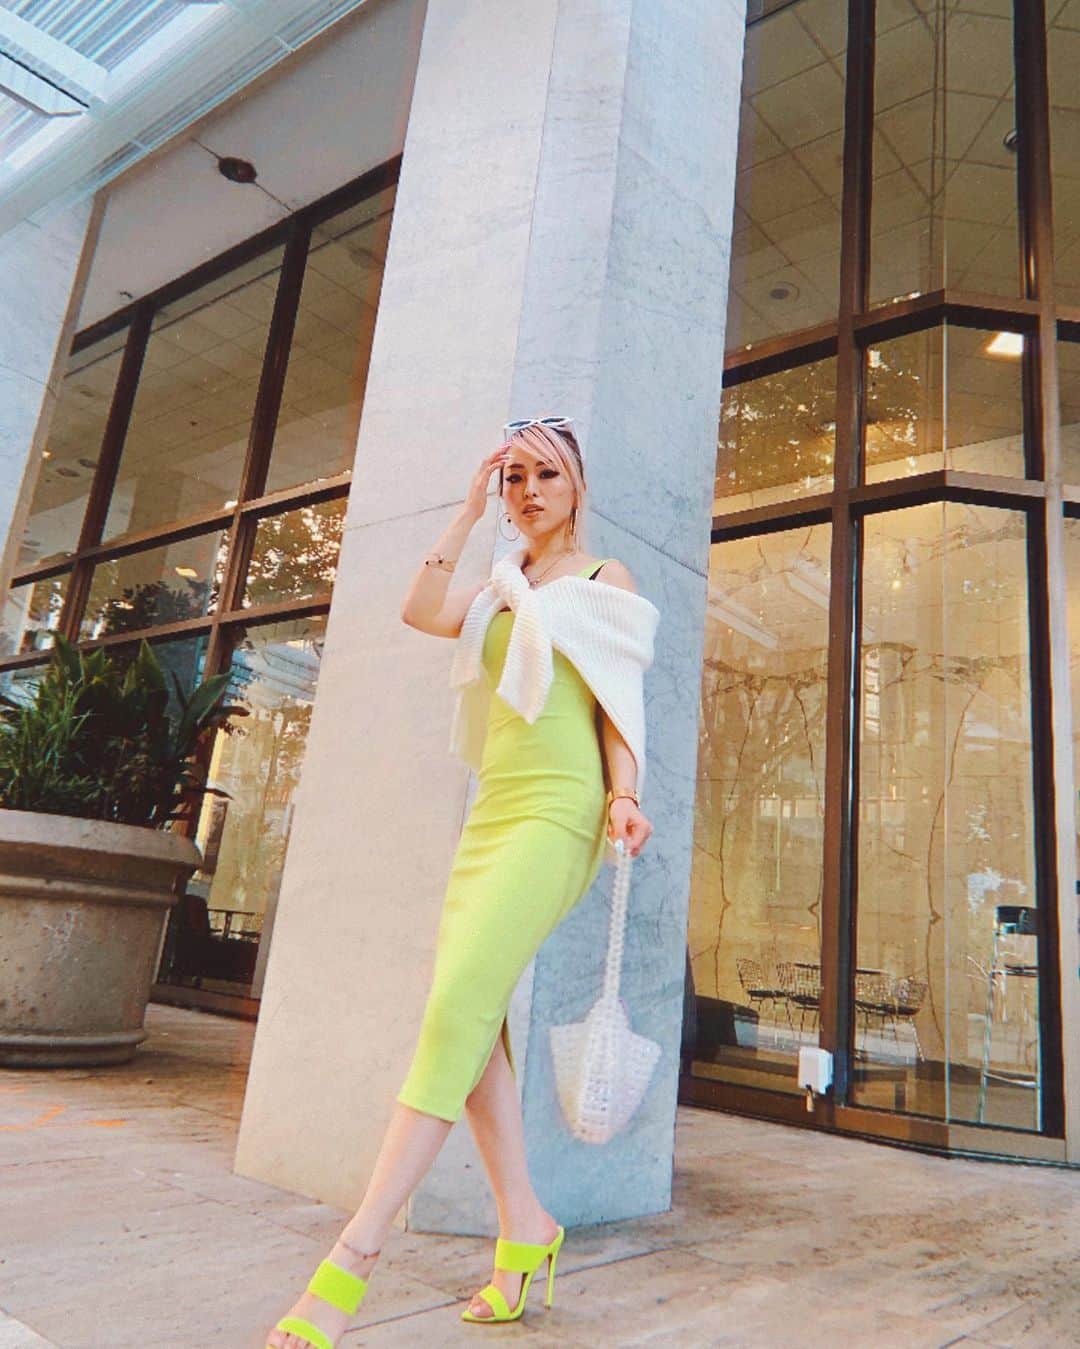 AikA♡ • 愛香 | JP Blogger • ブロガーのインスタグラム：「LIME x NEON 💚 Wasn’t a big fan of a bodycon midi dress before but now I am obsessed and I have 4 of them in different colors & prints! And sweater over shoulder is the new best summer “outerwear” when you cant find a perfect jacket in your closet. Chic, stylish yet practical 😉🙌🏻 Selling the exact bodycon dress on my @poshmark - swipe up on my IG stories 👗 ⊶ Dress - @urbanoutfitters  Sweater - @hm  Sandals - @shoedazzle  Bag - @urbanoutfitters  Sunnies - @zerouv ⊷ #mypersonalstyle #uoonyou #neongreen #petitefashion #summerlooks #stylingtips #petitefashion」